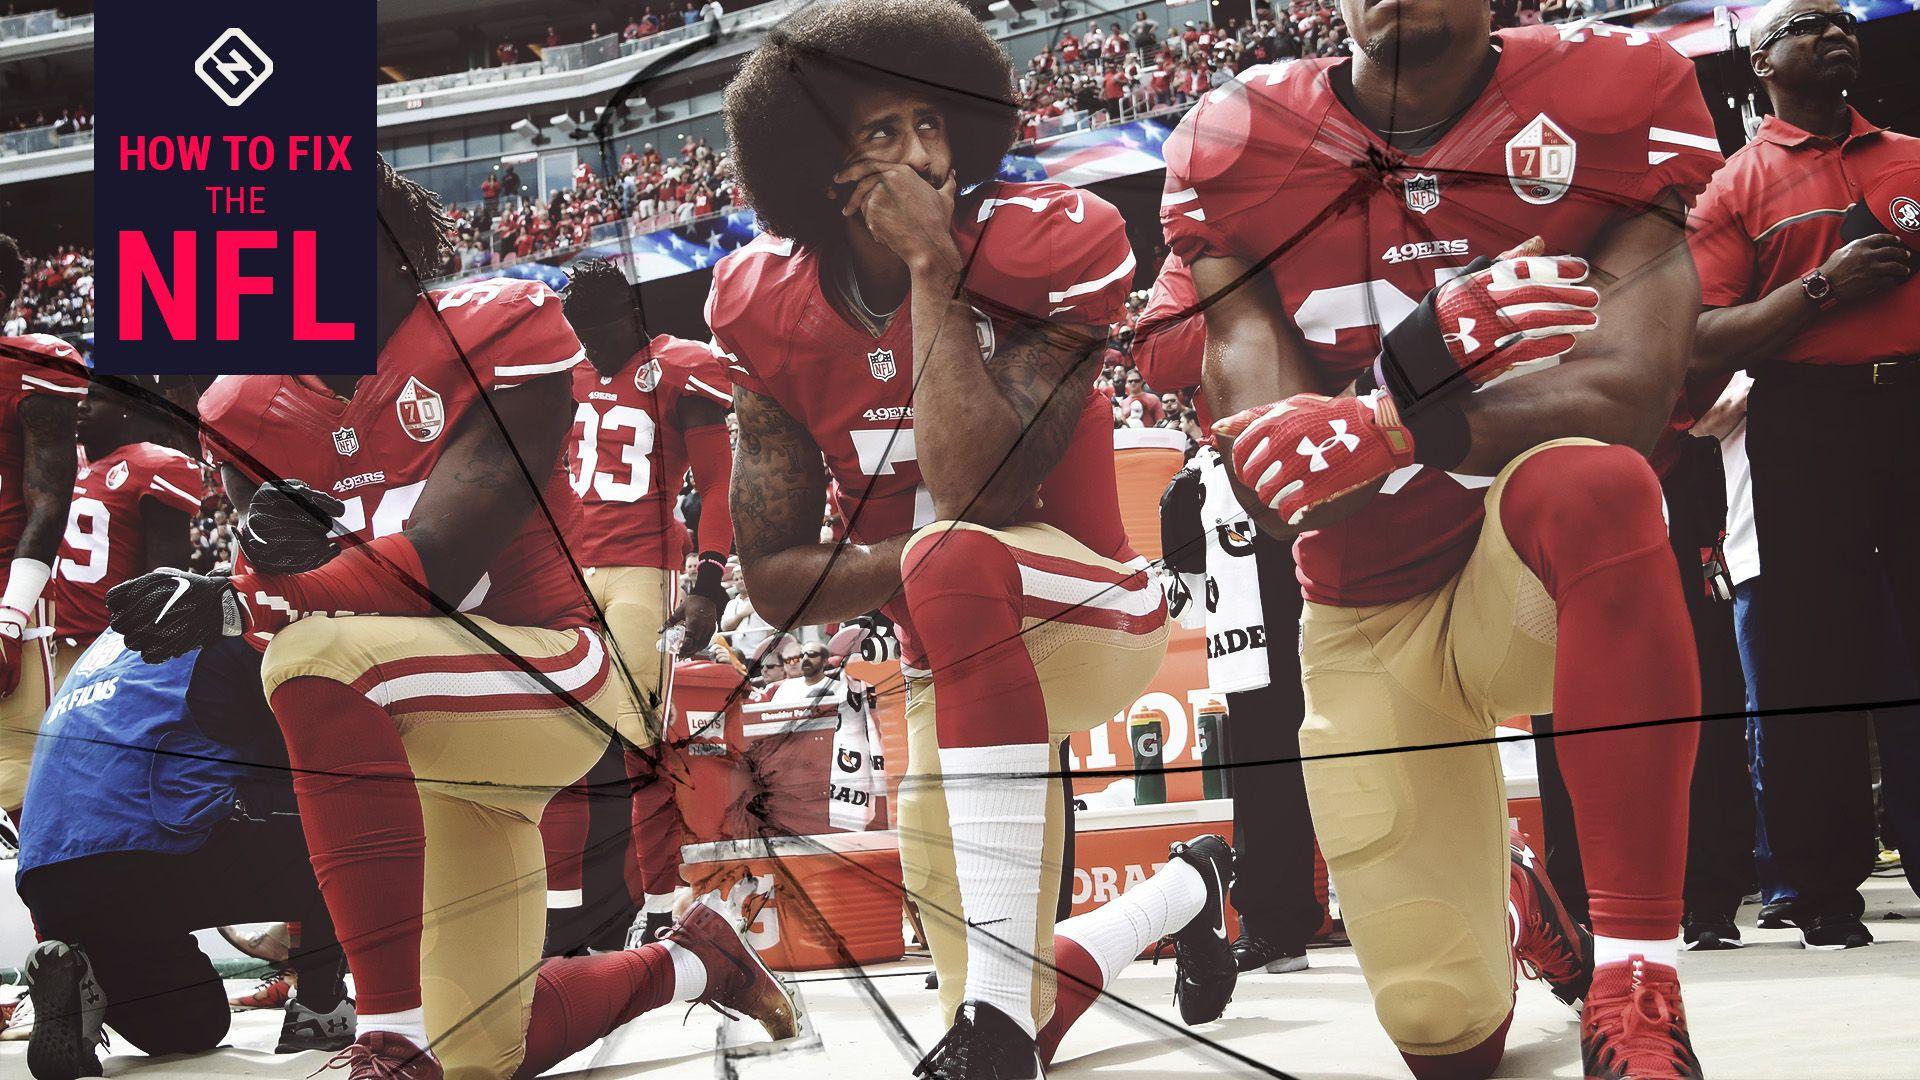 NFL can't keep ignoring those offended by player protests. NFL